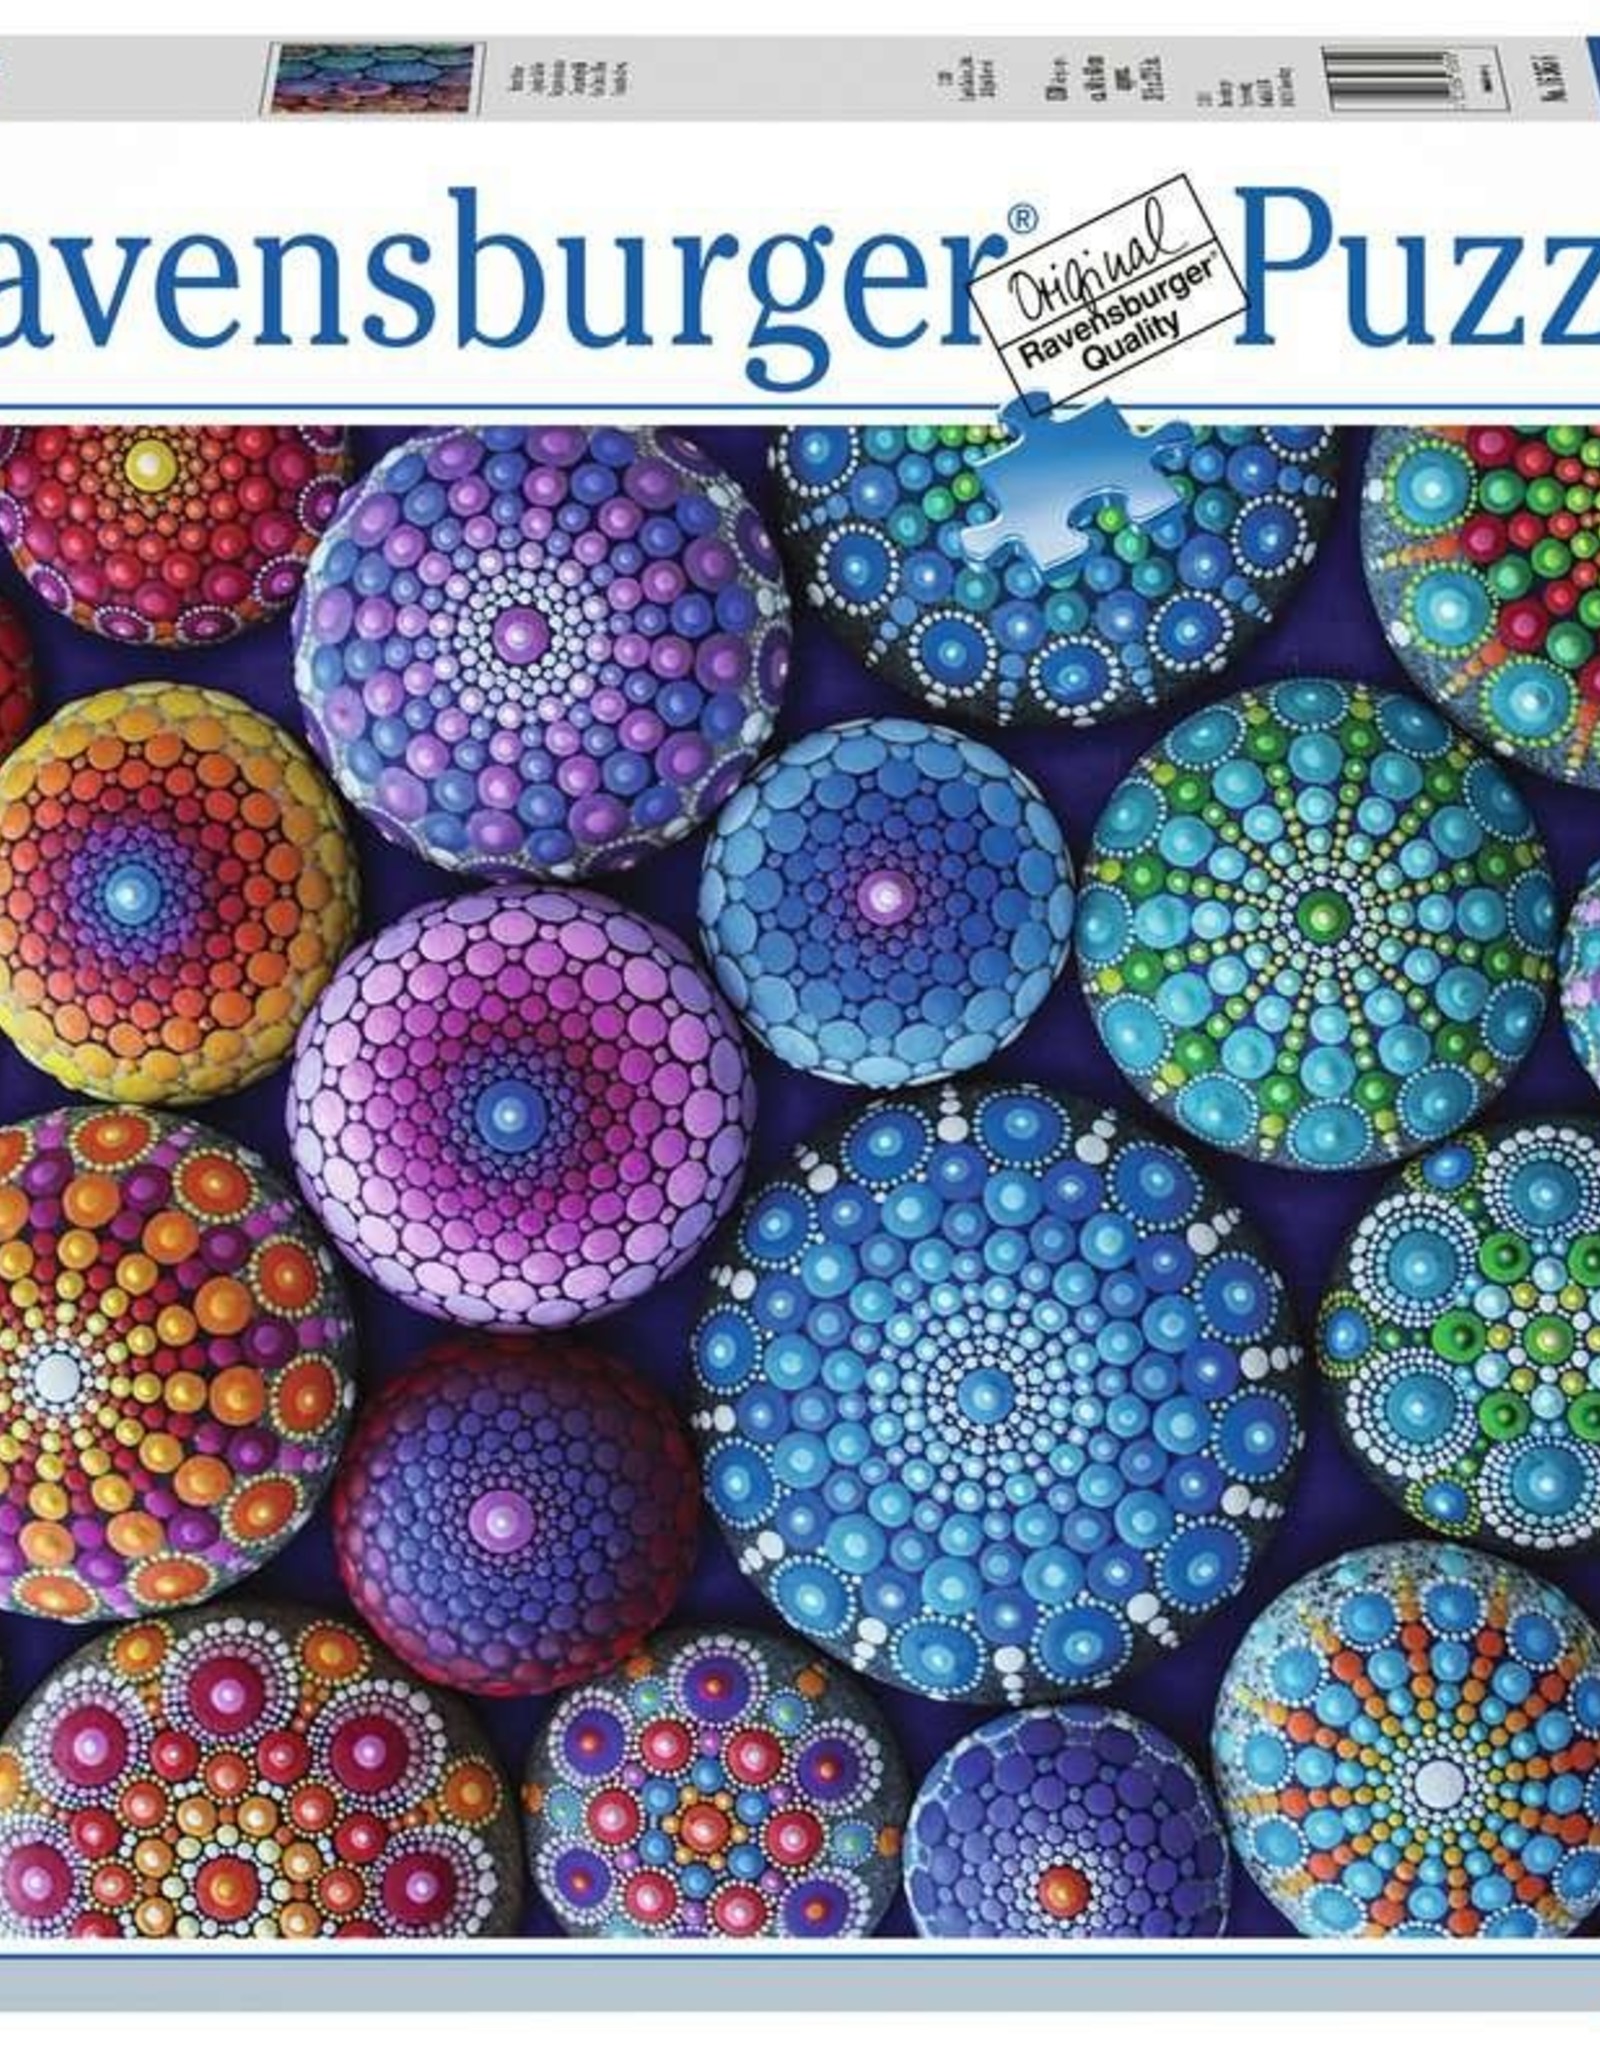 Ravensburger One Dot at a Time (1500 Pc)